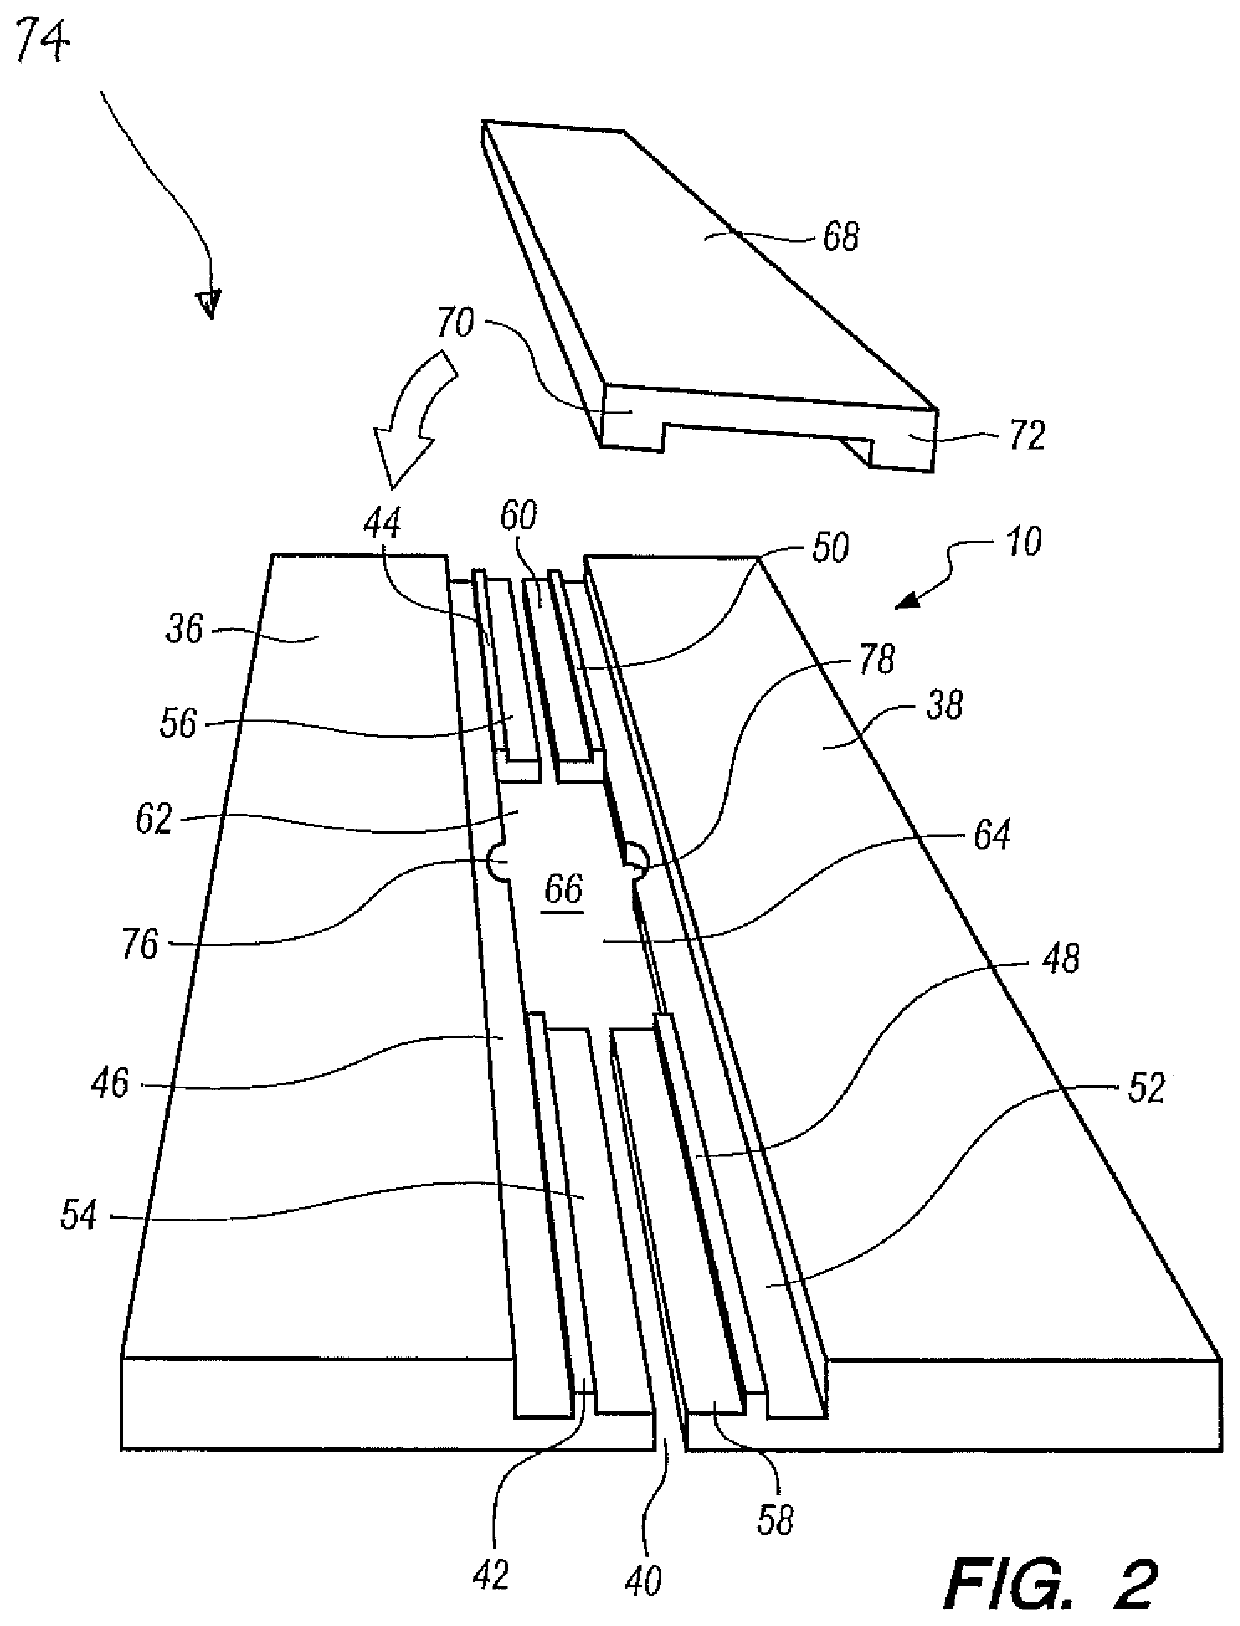 Reveal device for a wall panel system